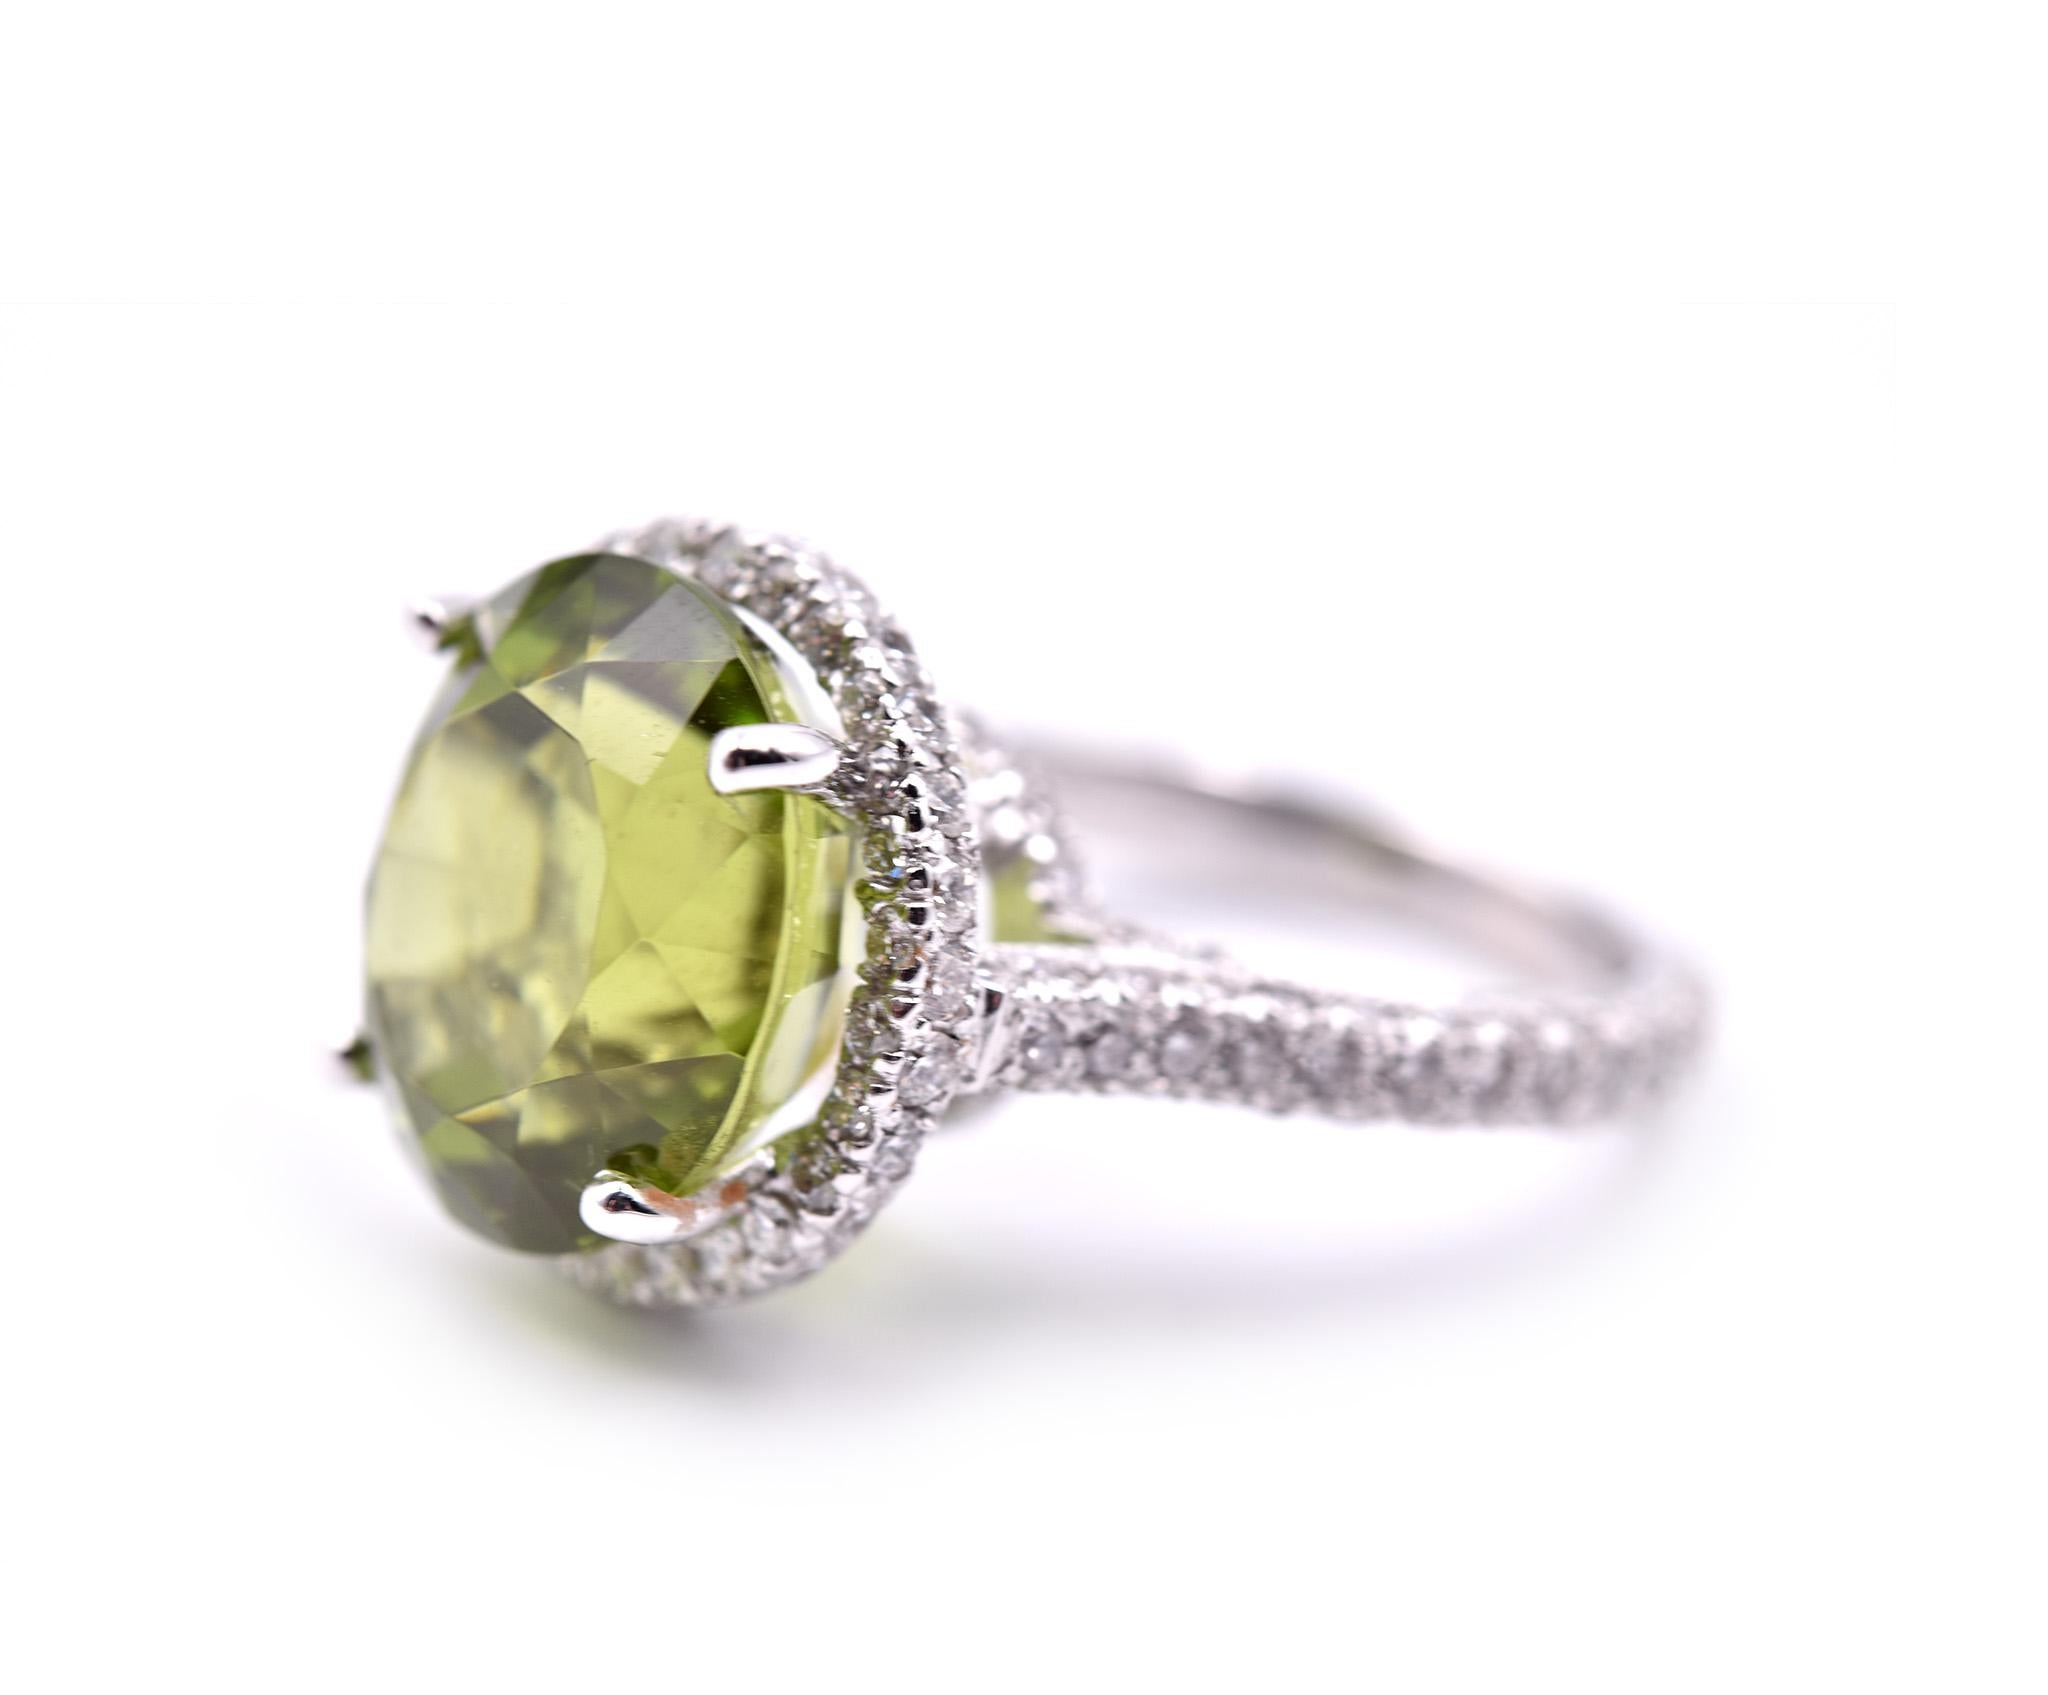 Designer: custom design
Material: 18k white gold
Green Tourmaline: round faceted = 11.96cttw
Diamond: 120 round brilliant = 2.50cttw 
Dimensions: ring has a diameter of 15.76mm
Ring Size: 6 ½ (please allow two extra shipping days for sizing